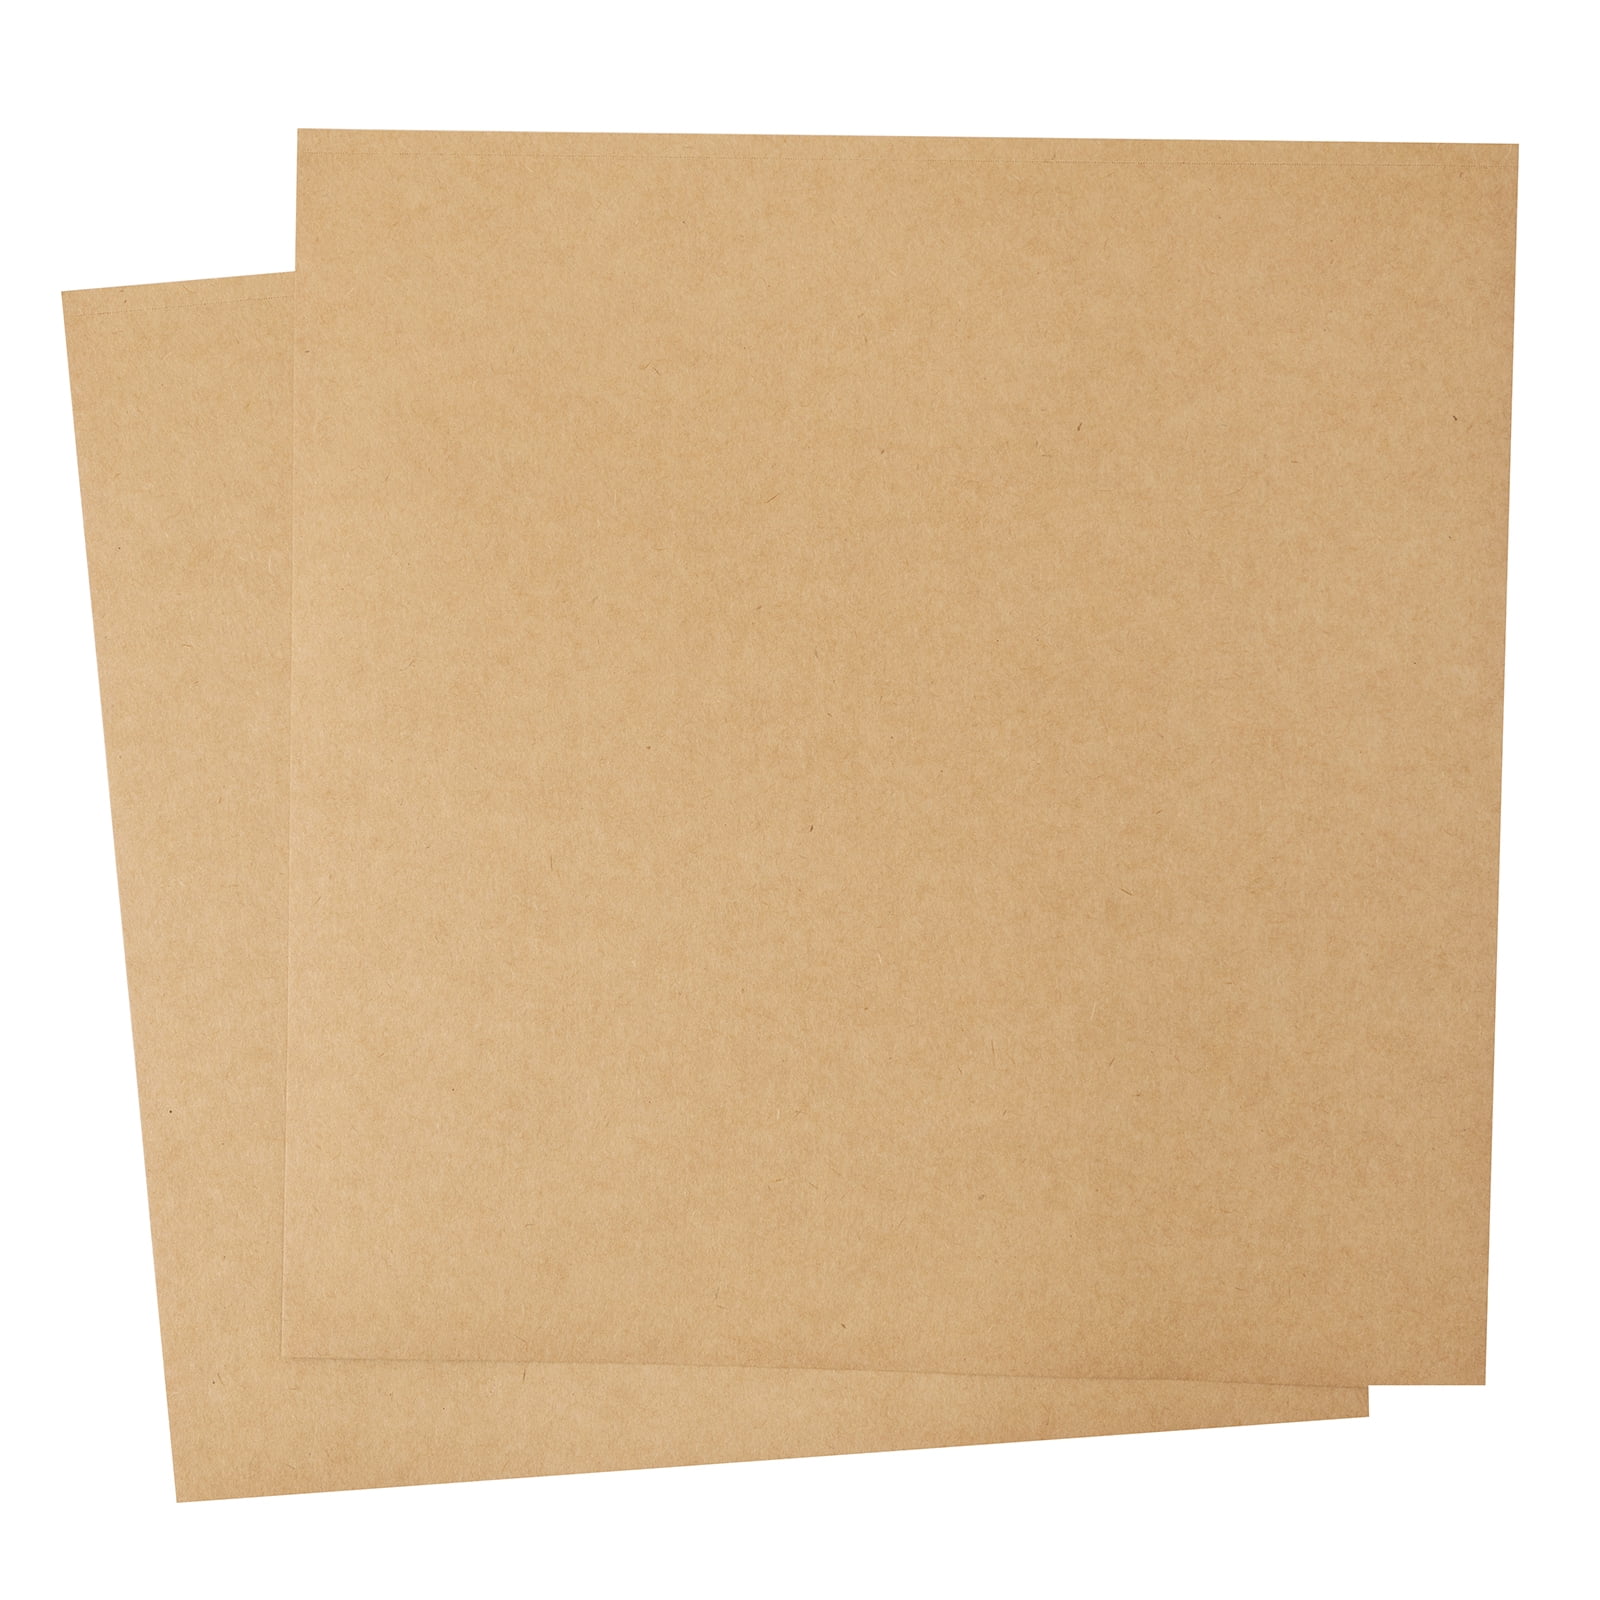  STOBOK 80pcs Blank Jam Kraft Cards Bristol Board Colored  Cardstock 8.5 x 11 Assorted Brown Kraft Compact Word Cards Cardboard  Printable Cardstock Note Cards Paper Study Card Portable : Health &  Household